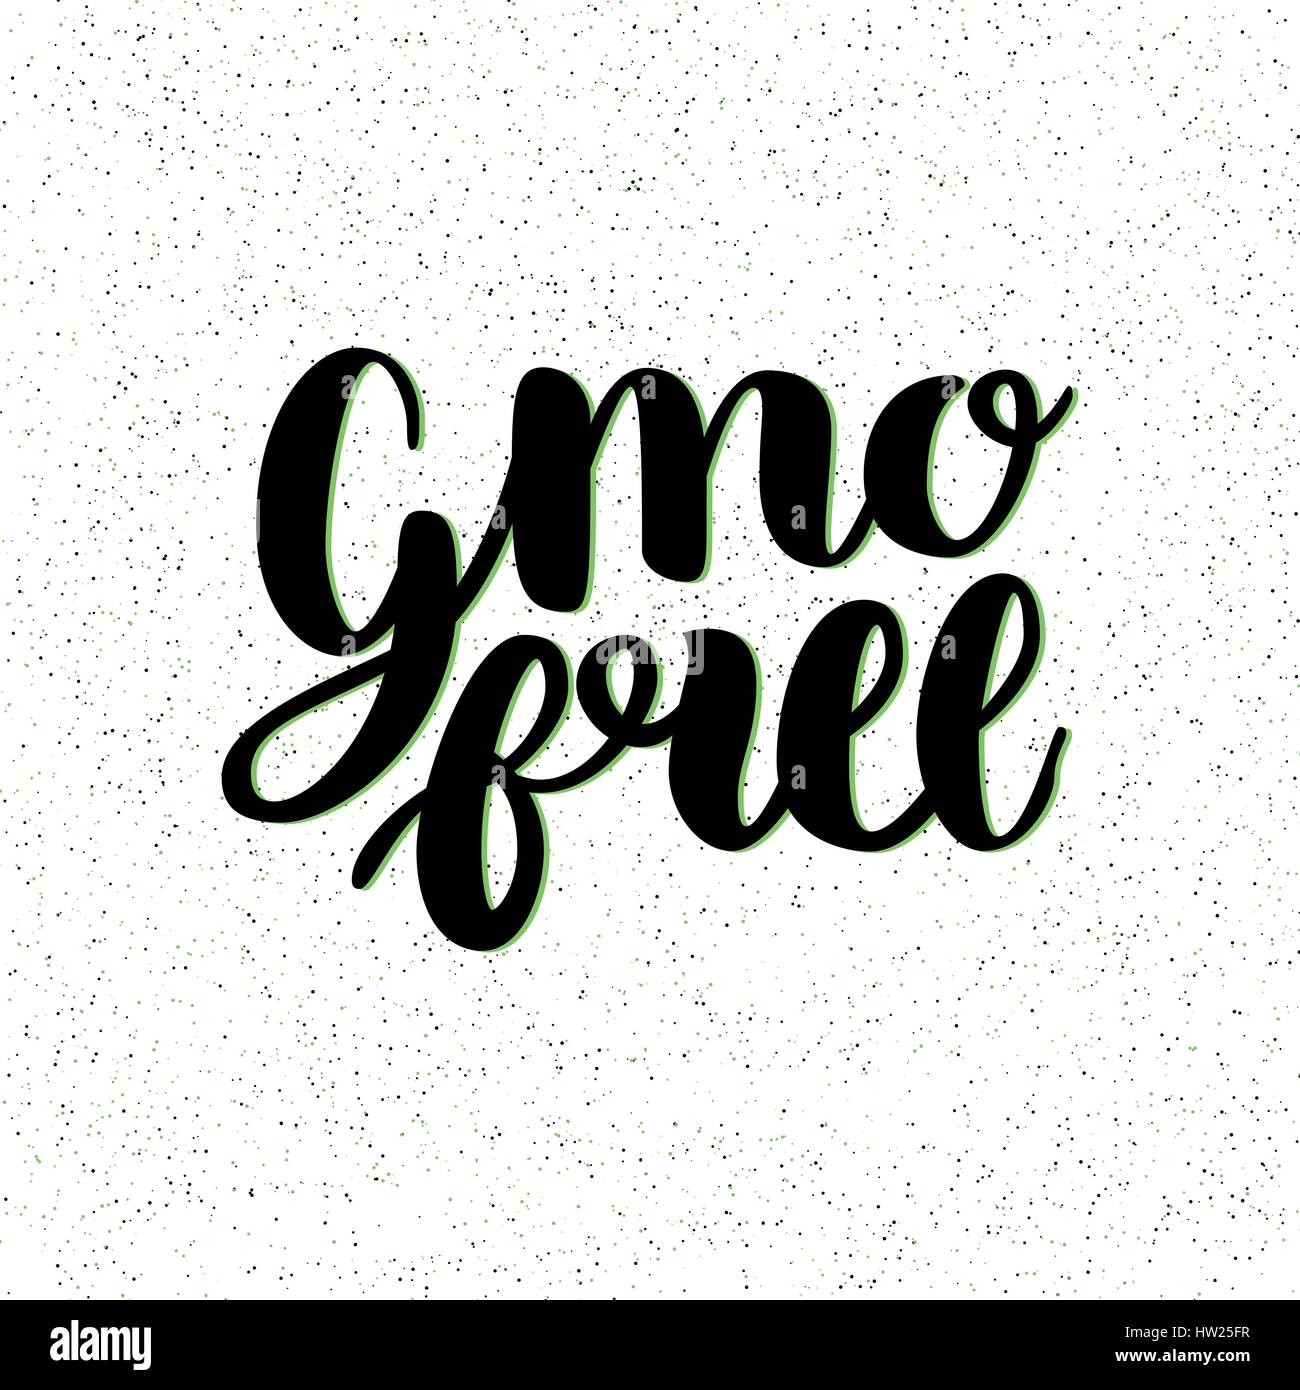 GMO free hand drawn logo, label. Vector illustration for food and drink, restaurants, menu, bio markets and organic products. Brush lettering, calligraphy. Isolated. Stock Vector